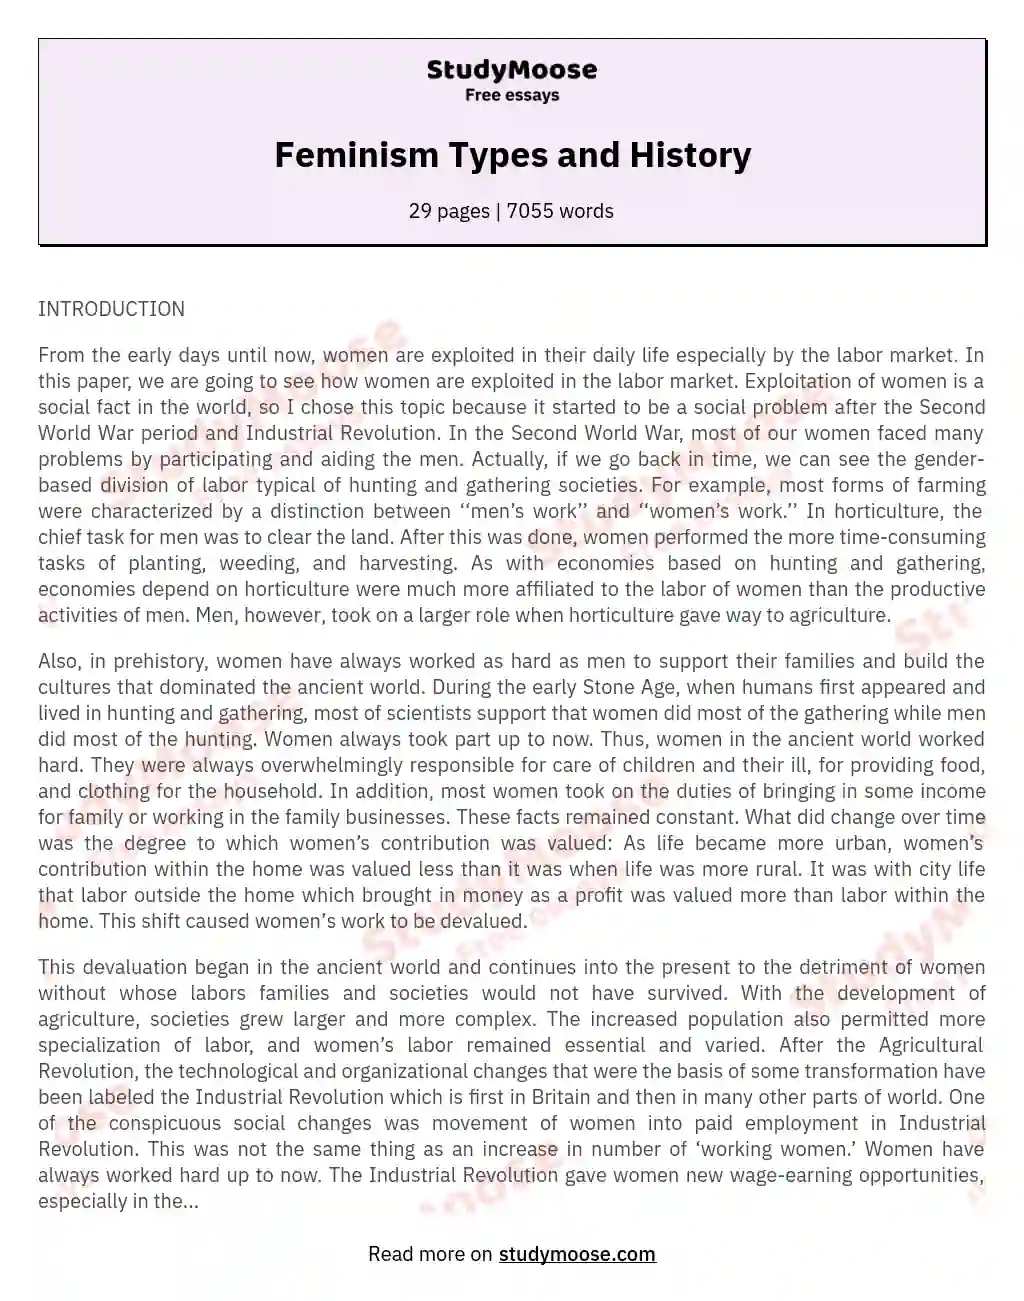 Feminism Types and History essay